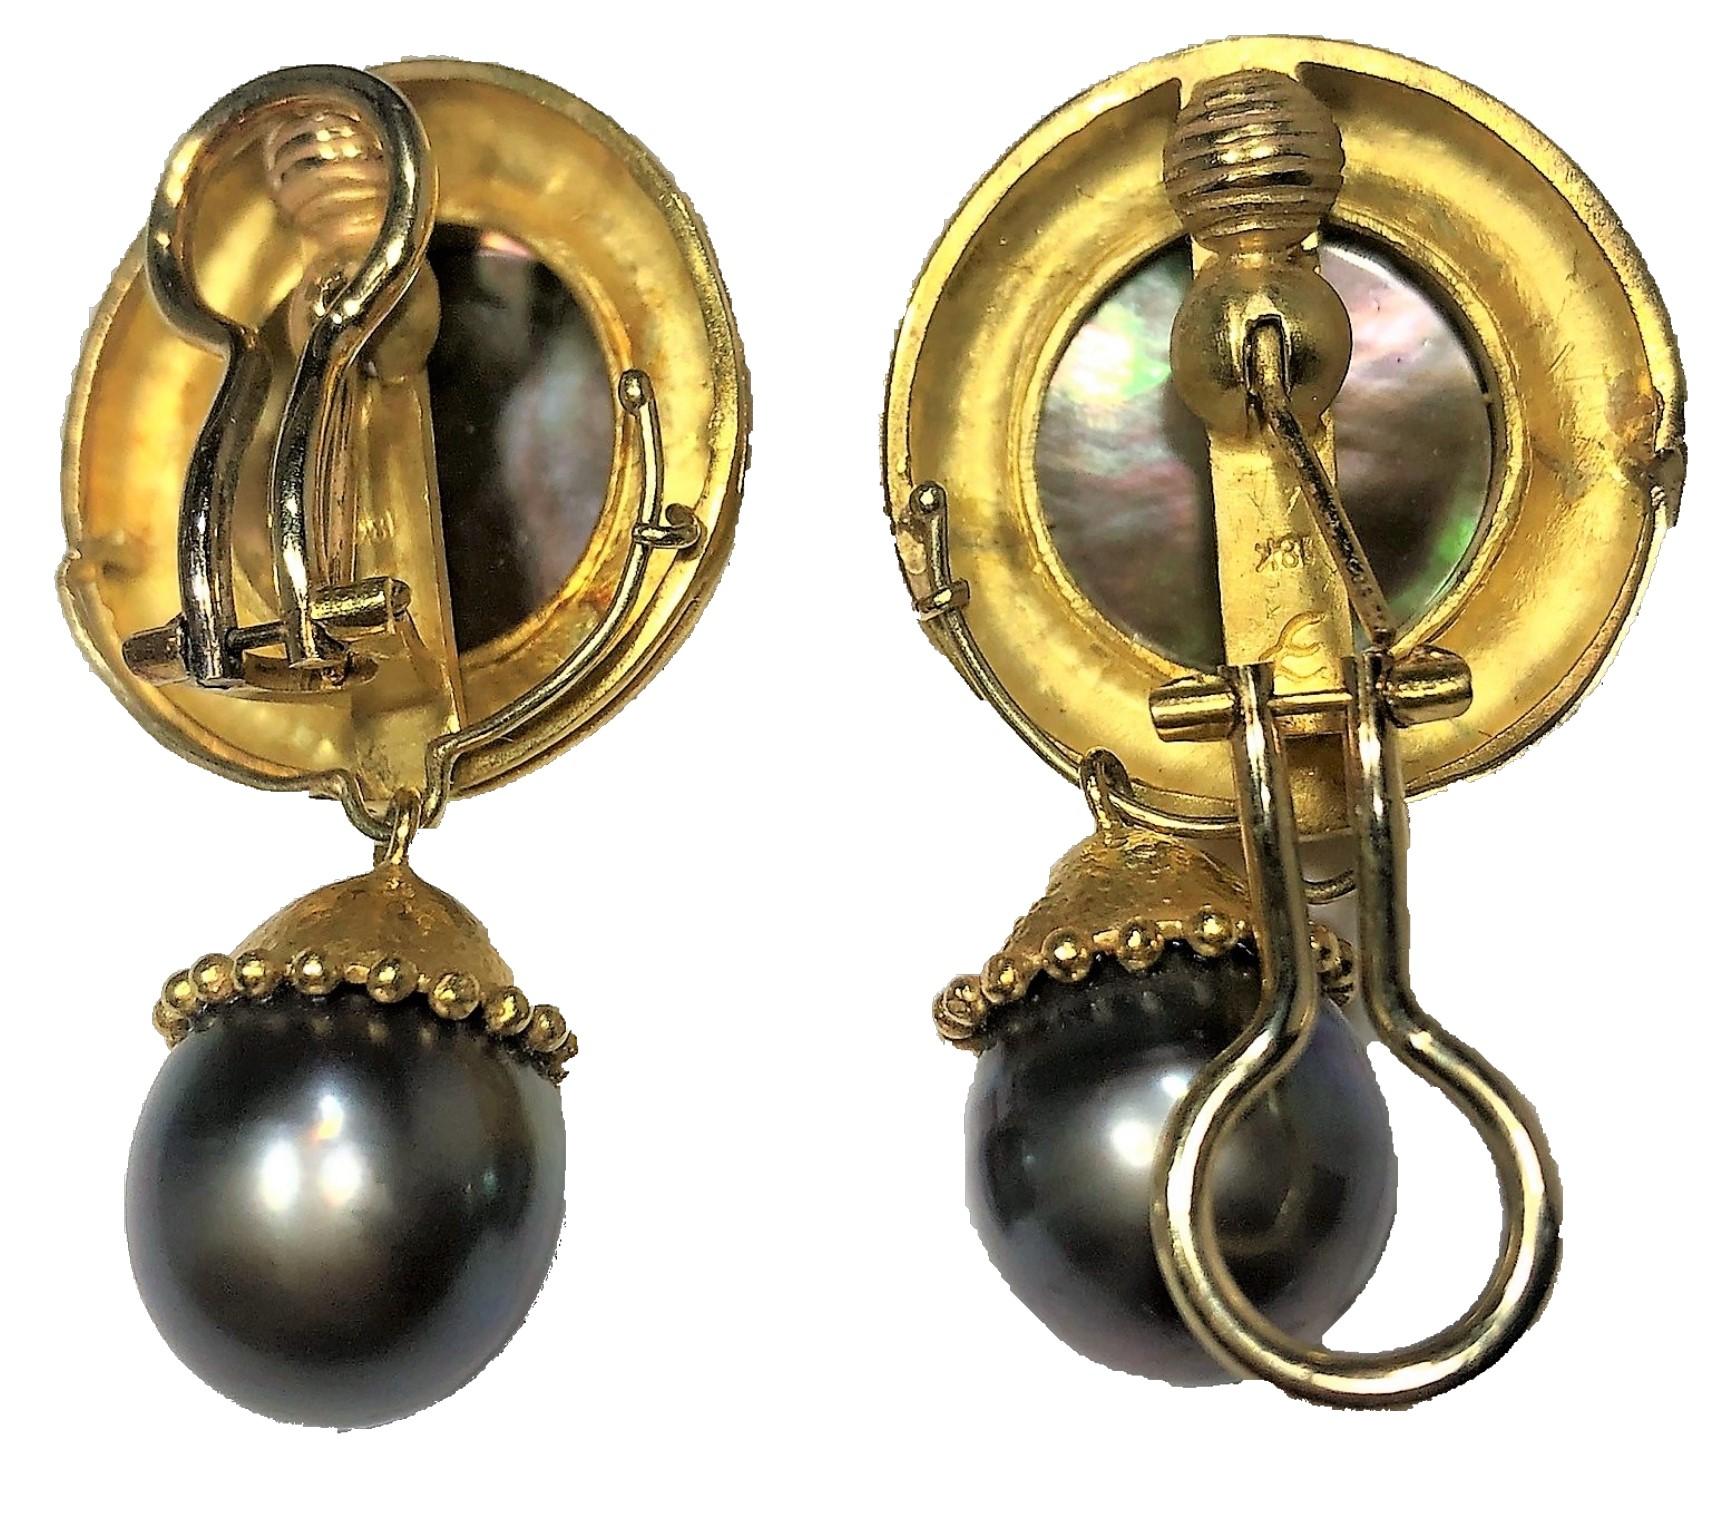 By designer Elizabeth Locke, these handsome 18K yellow gold
and gray pearl earrings are lovely in person. The south sea pearls
hanging at the bottom of the earrings measure 13.5mm. The overall
length is 1 3/4 inches and the width is 1 1/16 inch.